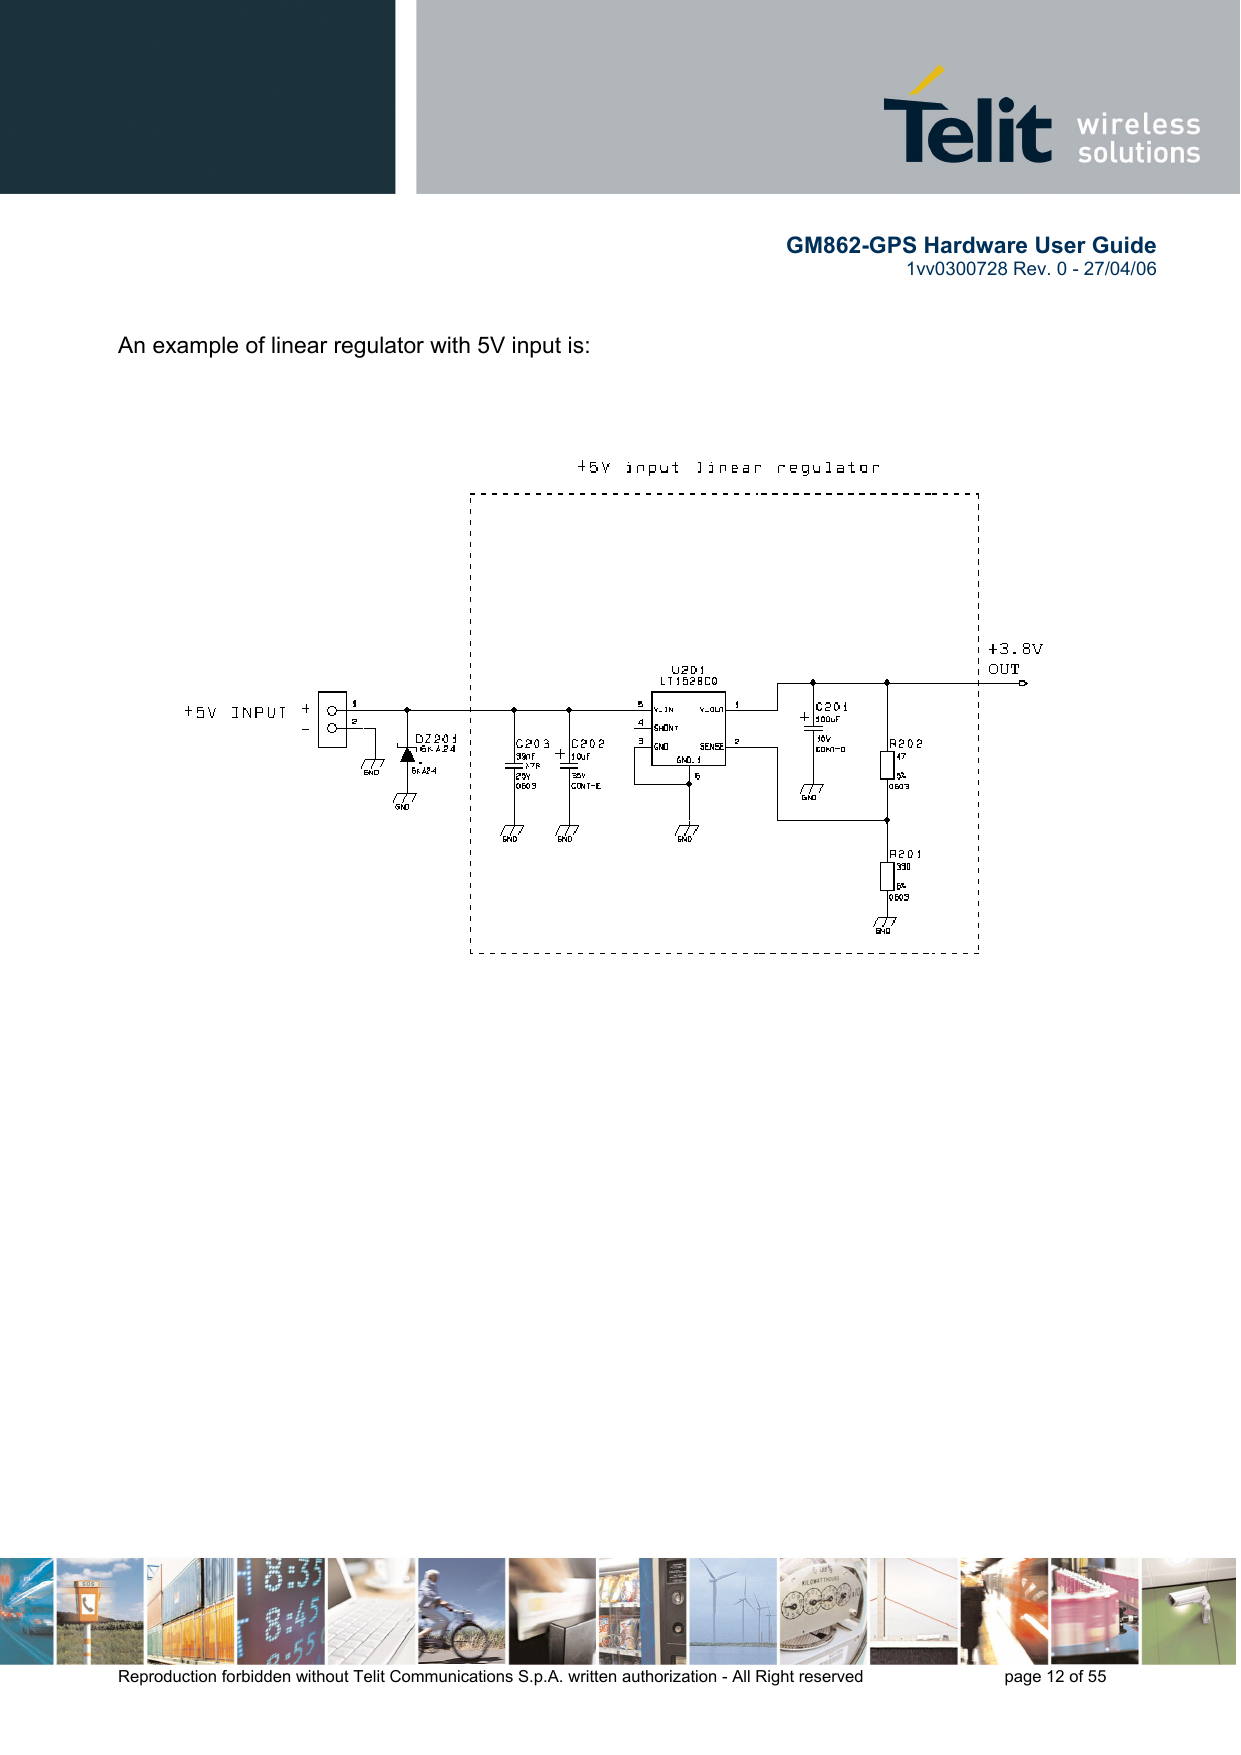        GM862-GPS Hardware User Guide   1vv0300728 Rev. 0 - 27/04/06    Reproduction forbidden without Telit Communications S.p.A. written authorization - All Right reserved    page 12 of 55    An example of linear regulator with 5V input is:       